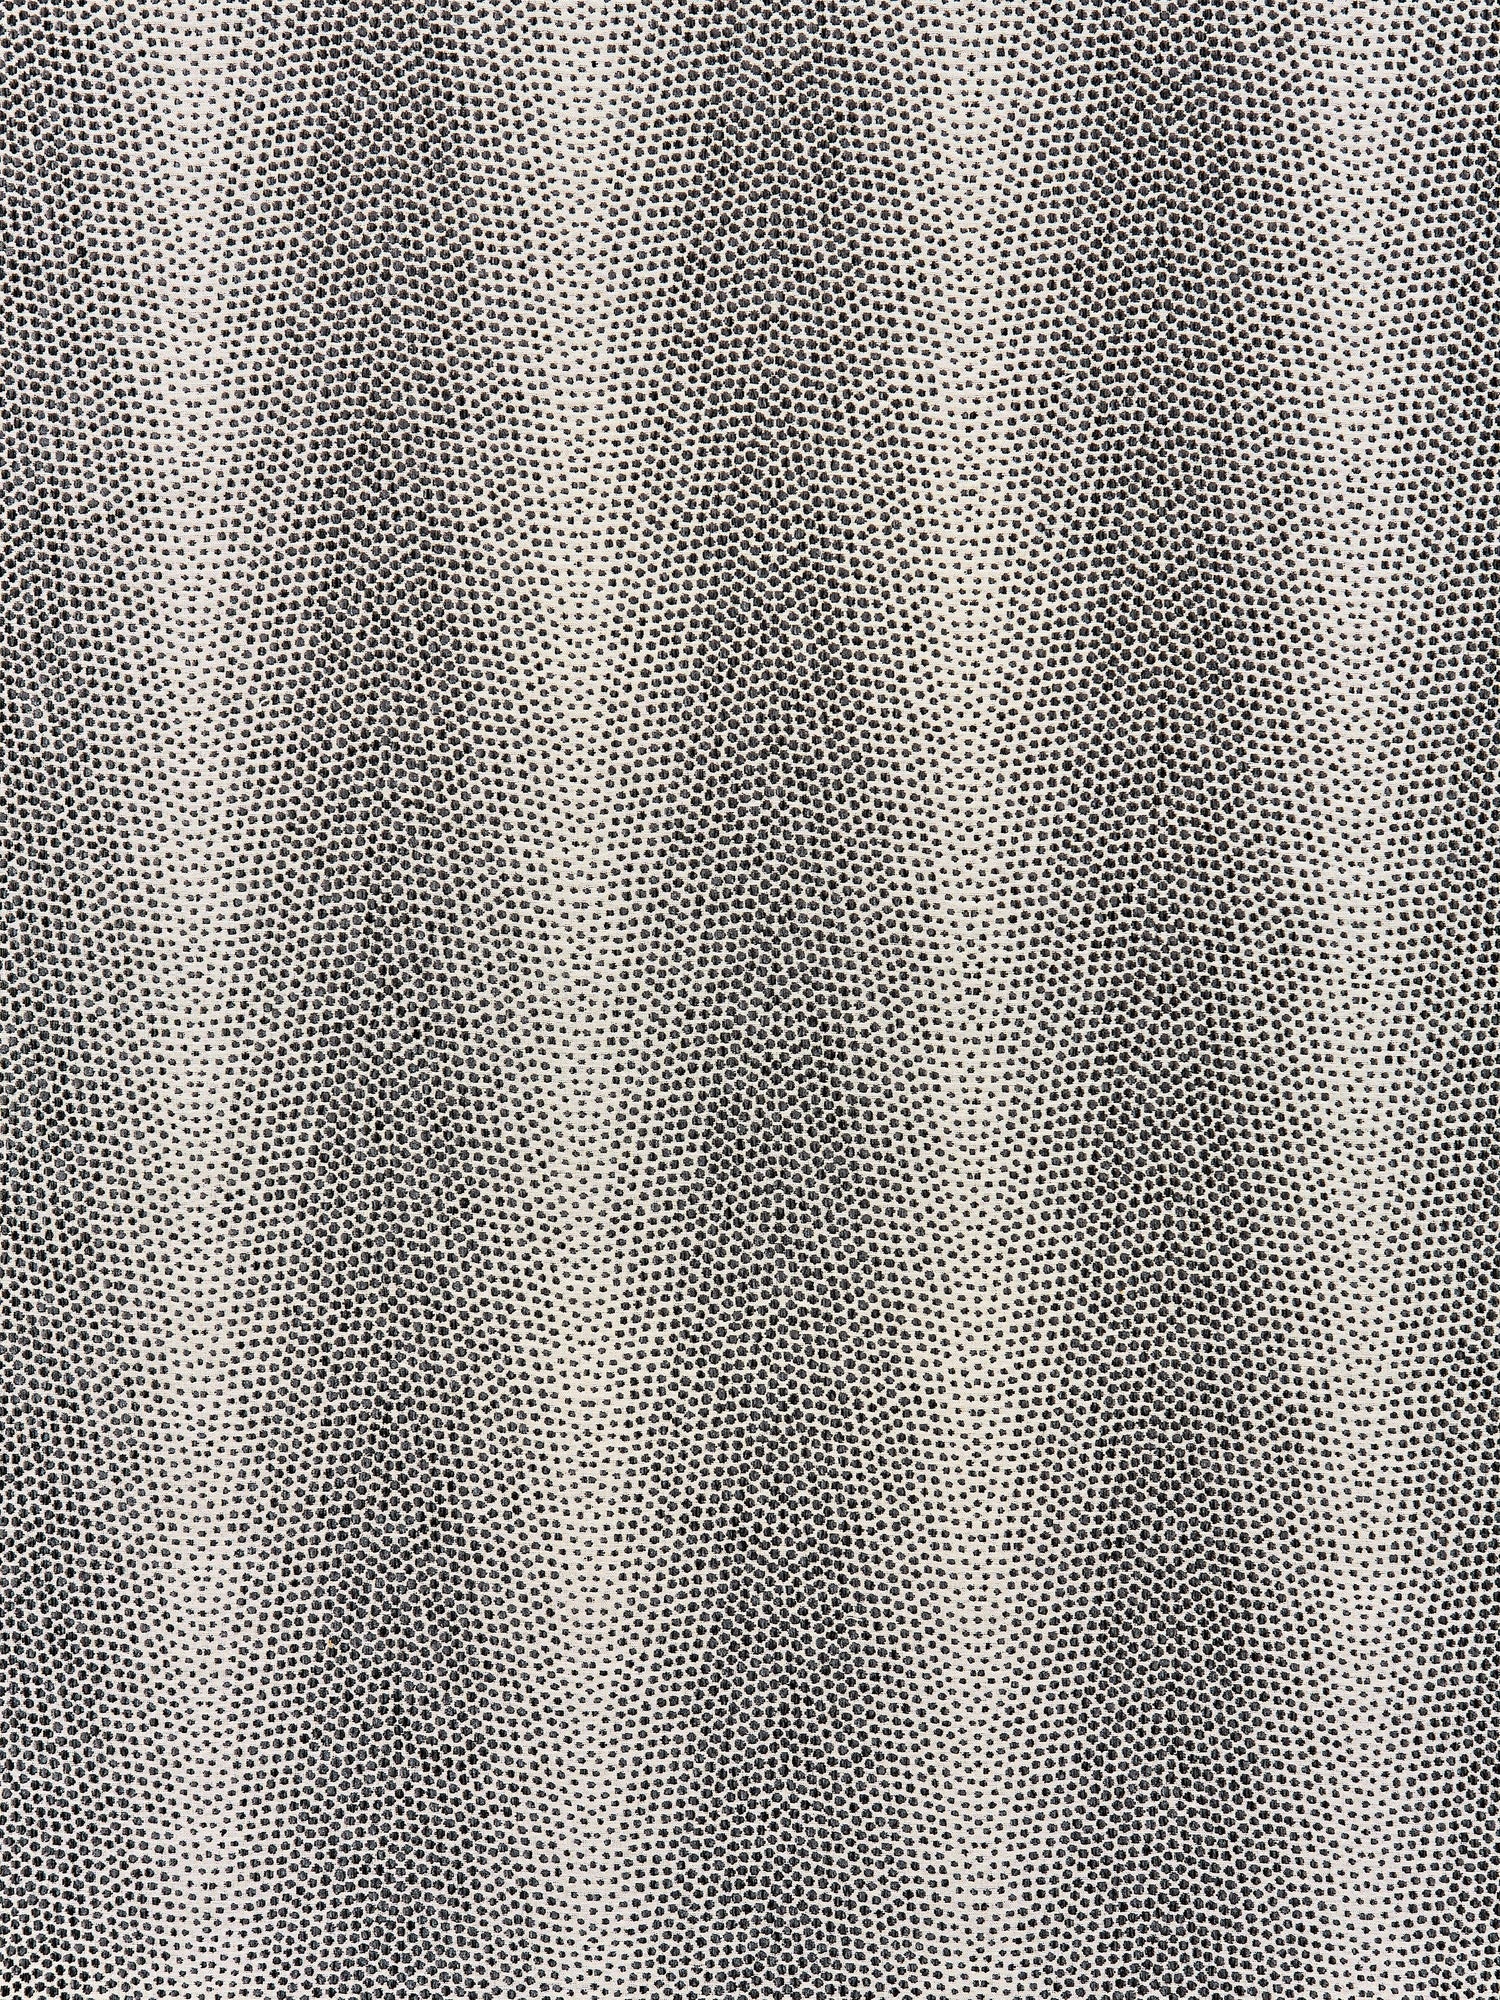 Despres Weave fabric in charcoal color - pattern number SC 000327144 - by Scalamandre in the Scalamandre Fabrics Book 1 collection